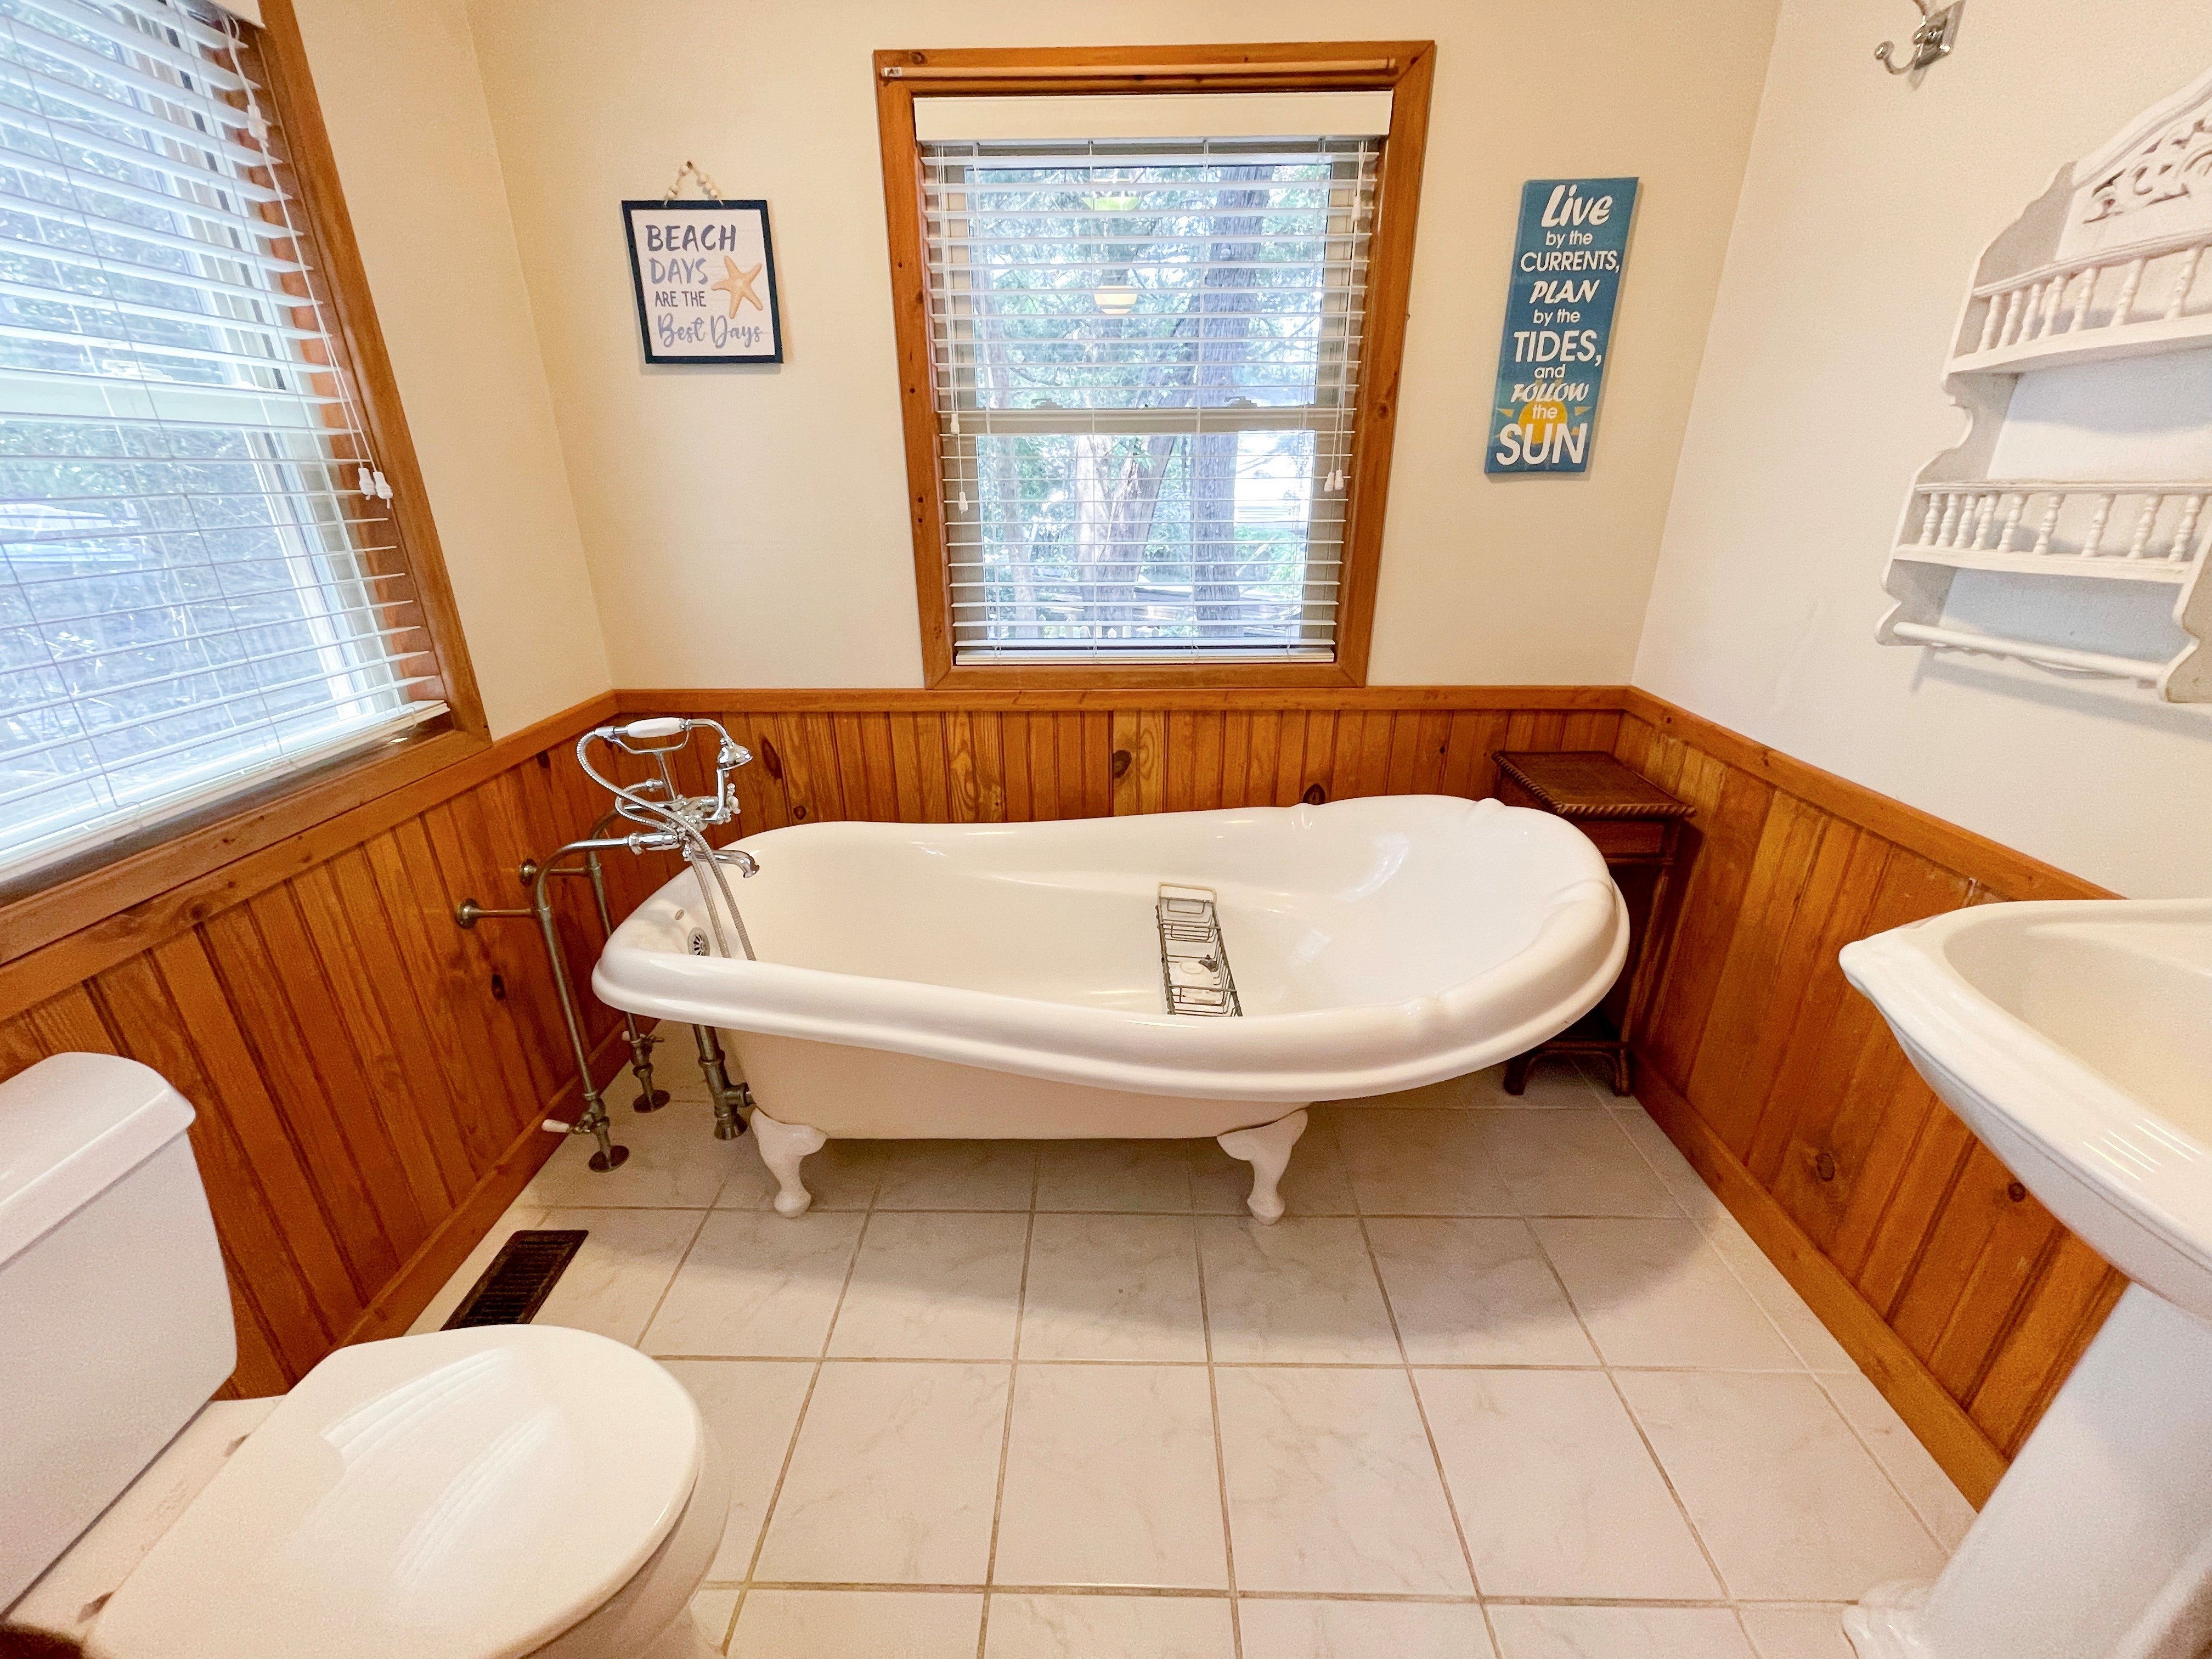 Primary Bath with Clawfoot Tub, First Floor